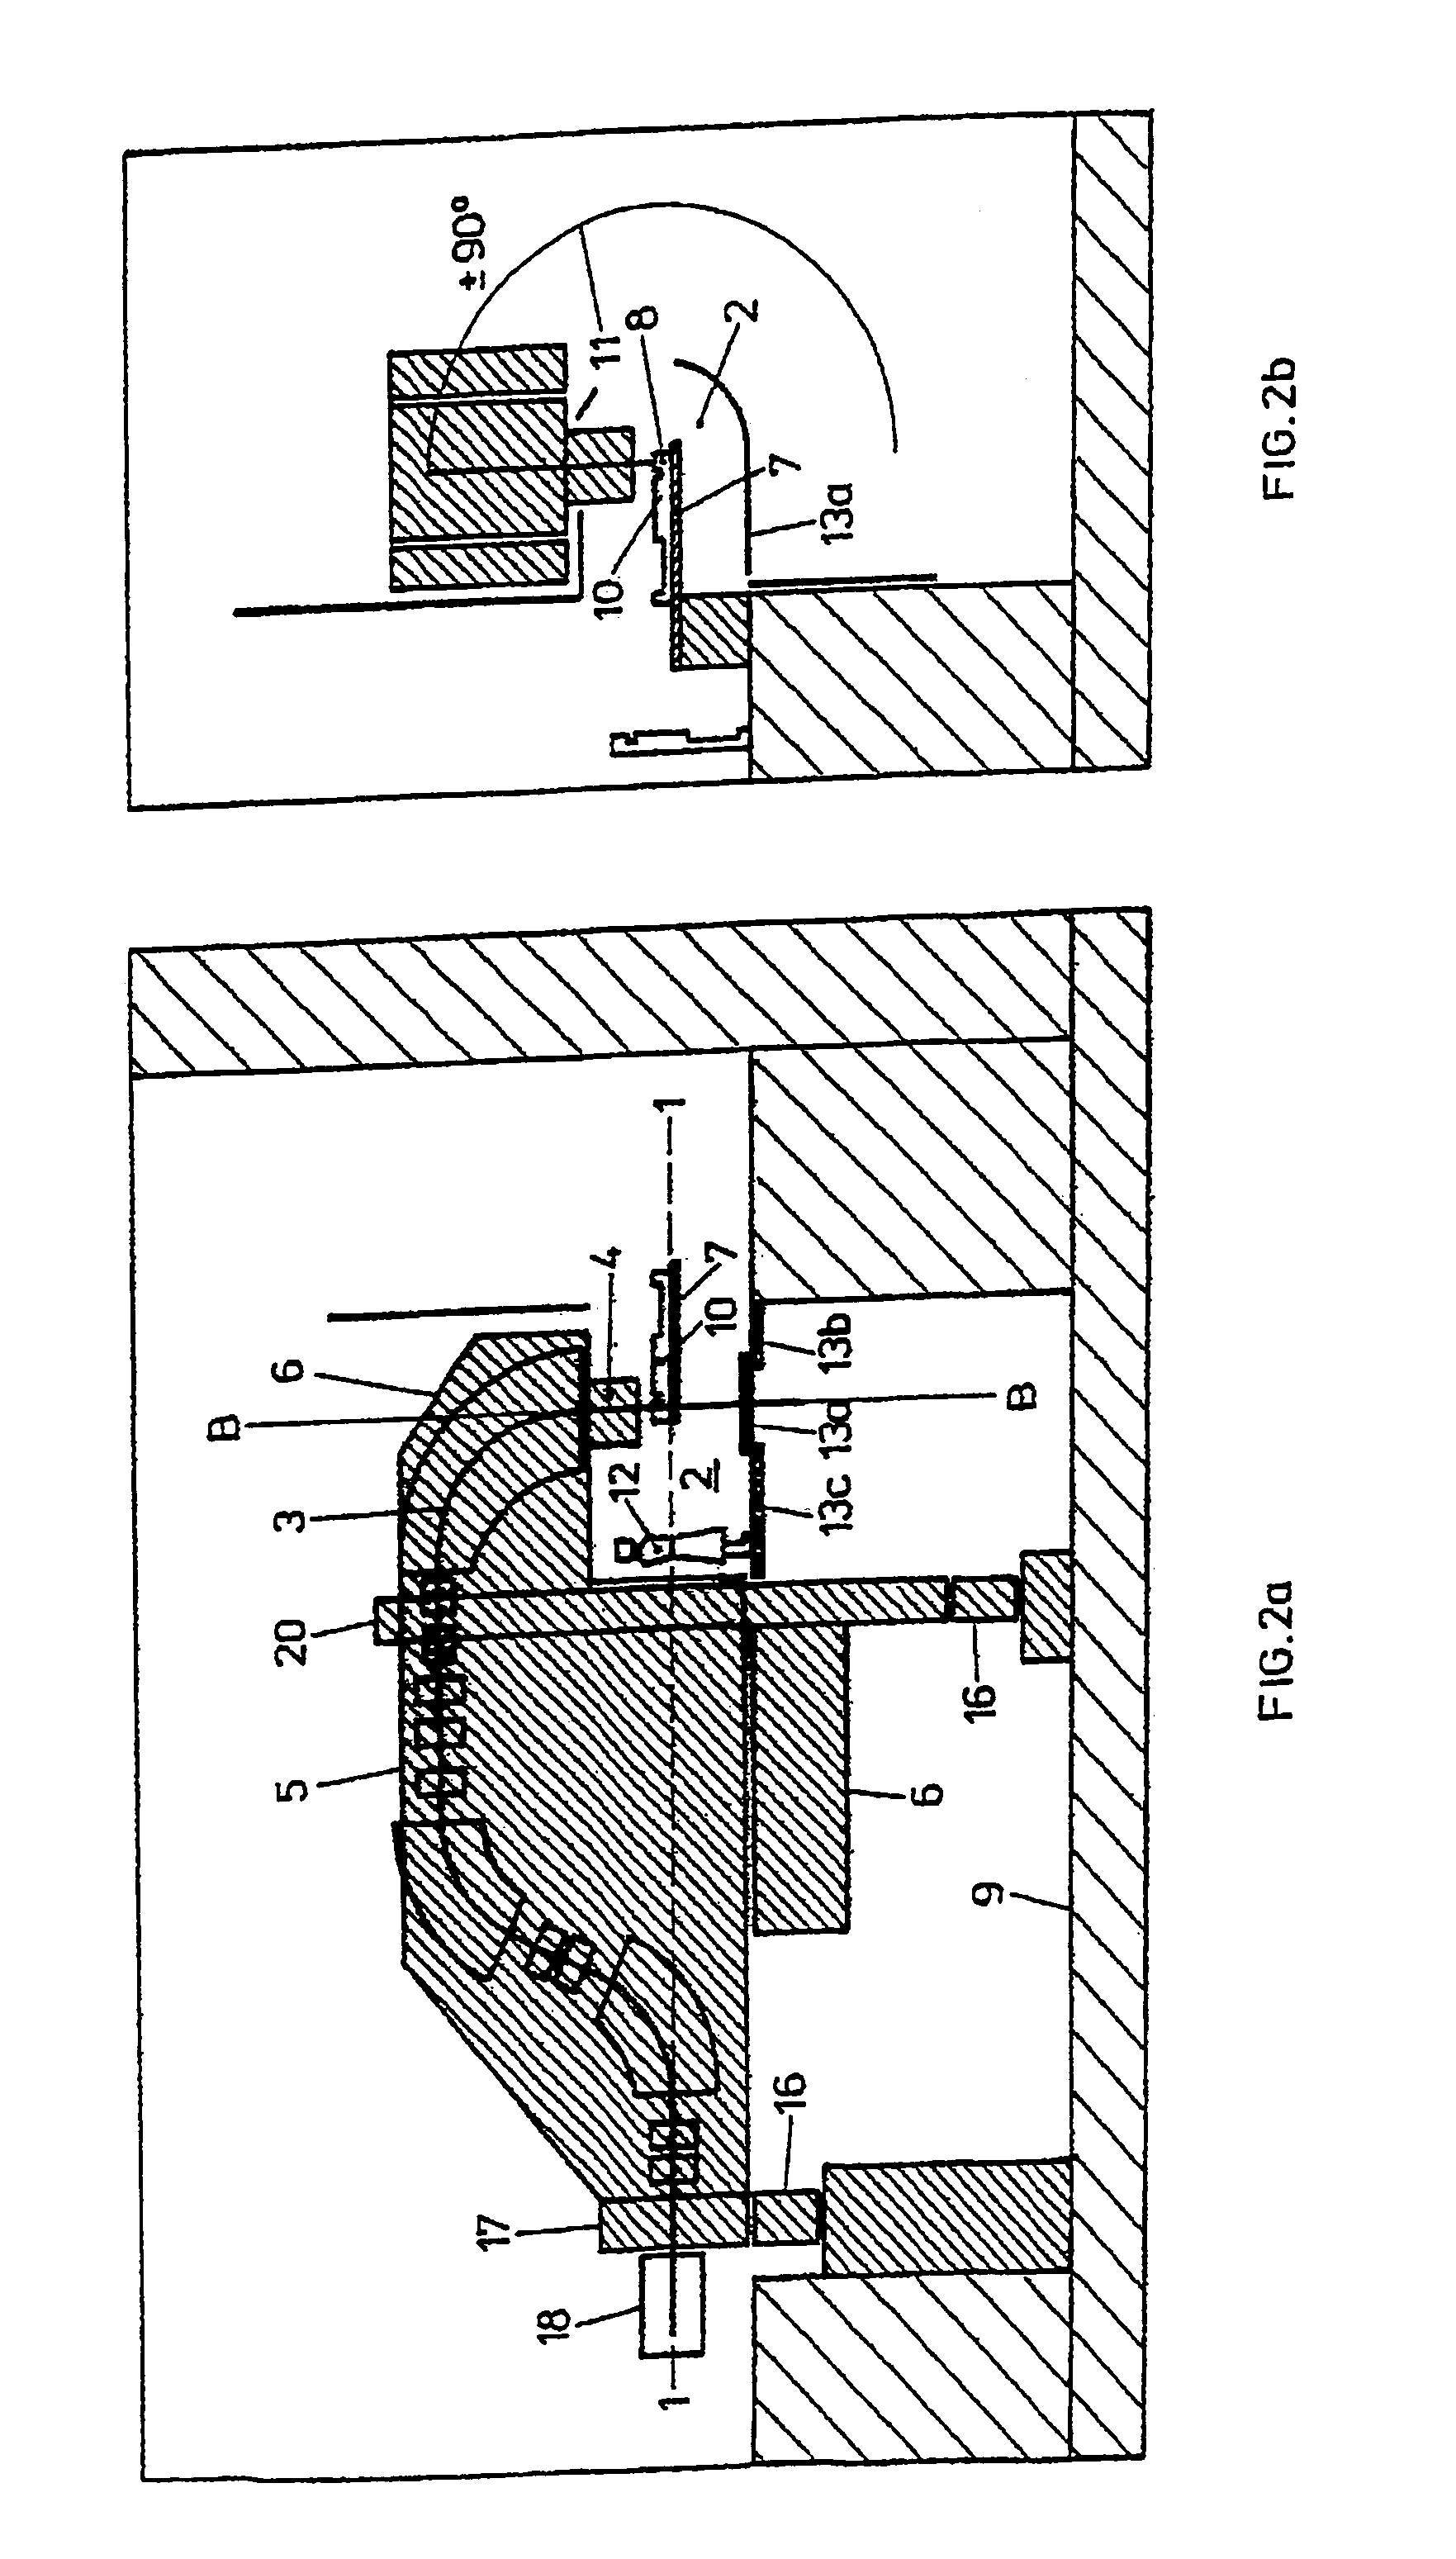 Arrangement for performing proton therapy